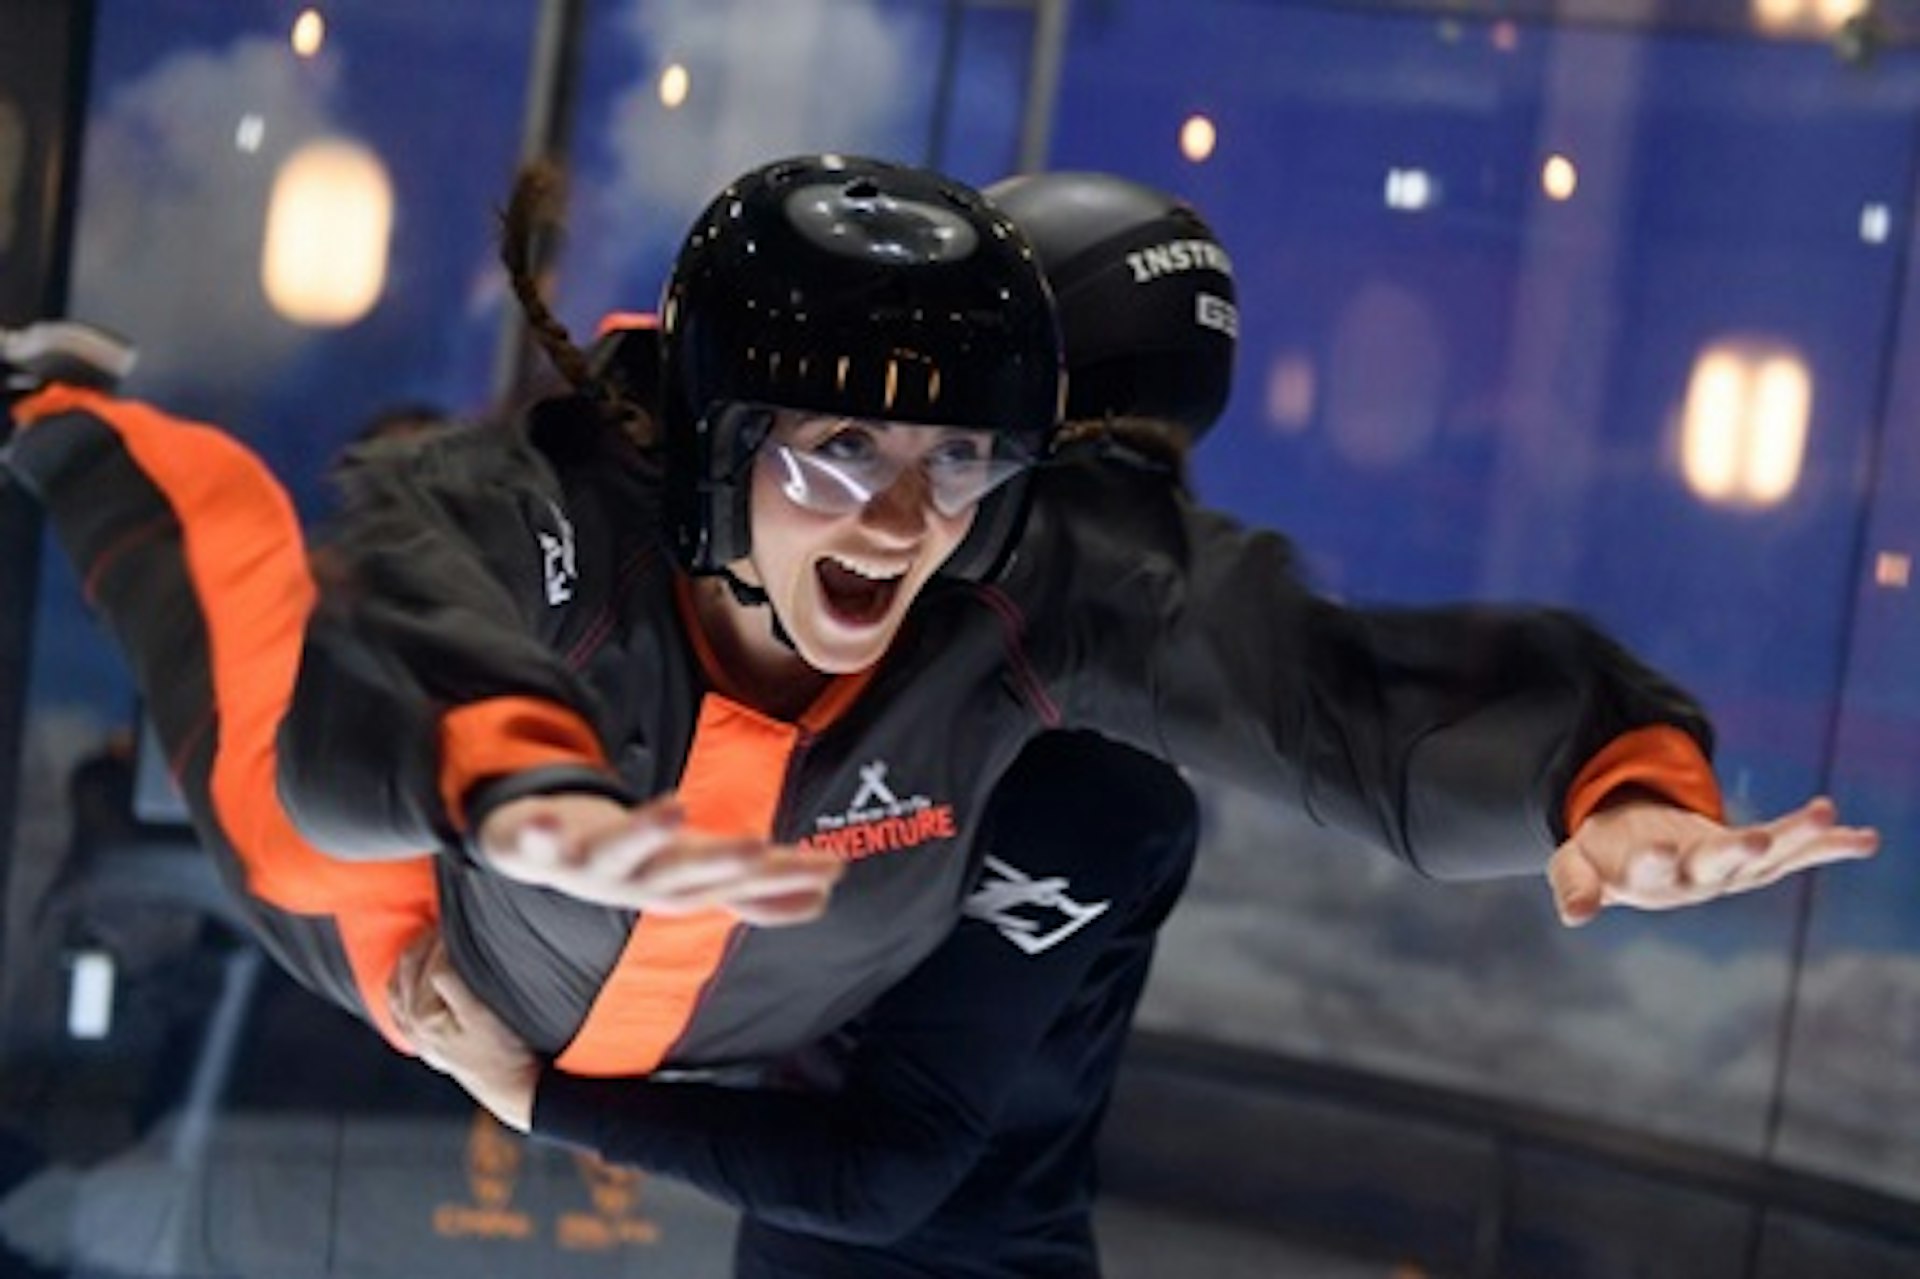 iFly Indoor Skydiving and Archery at The Bear Grylls Adventure